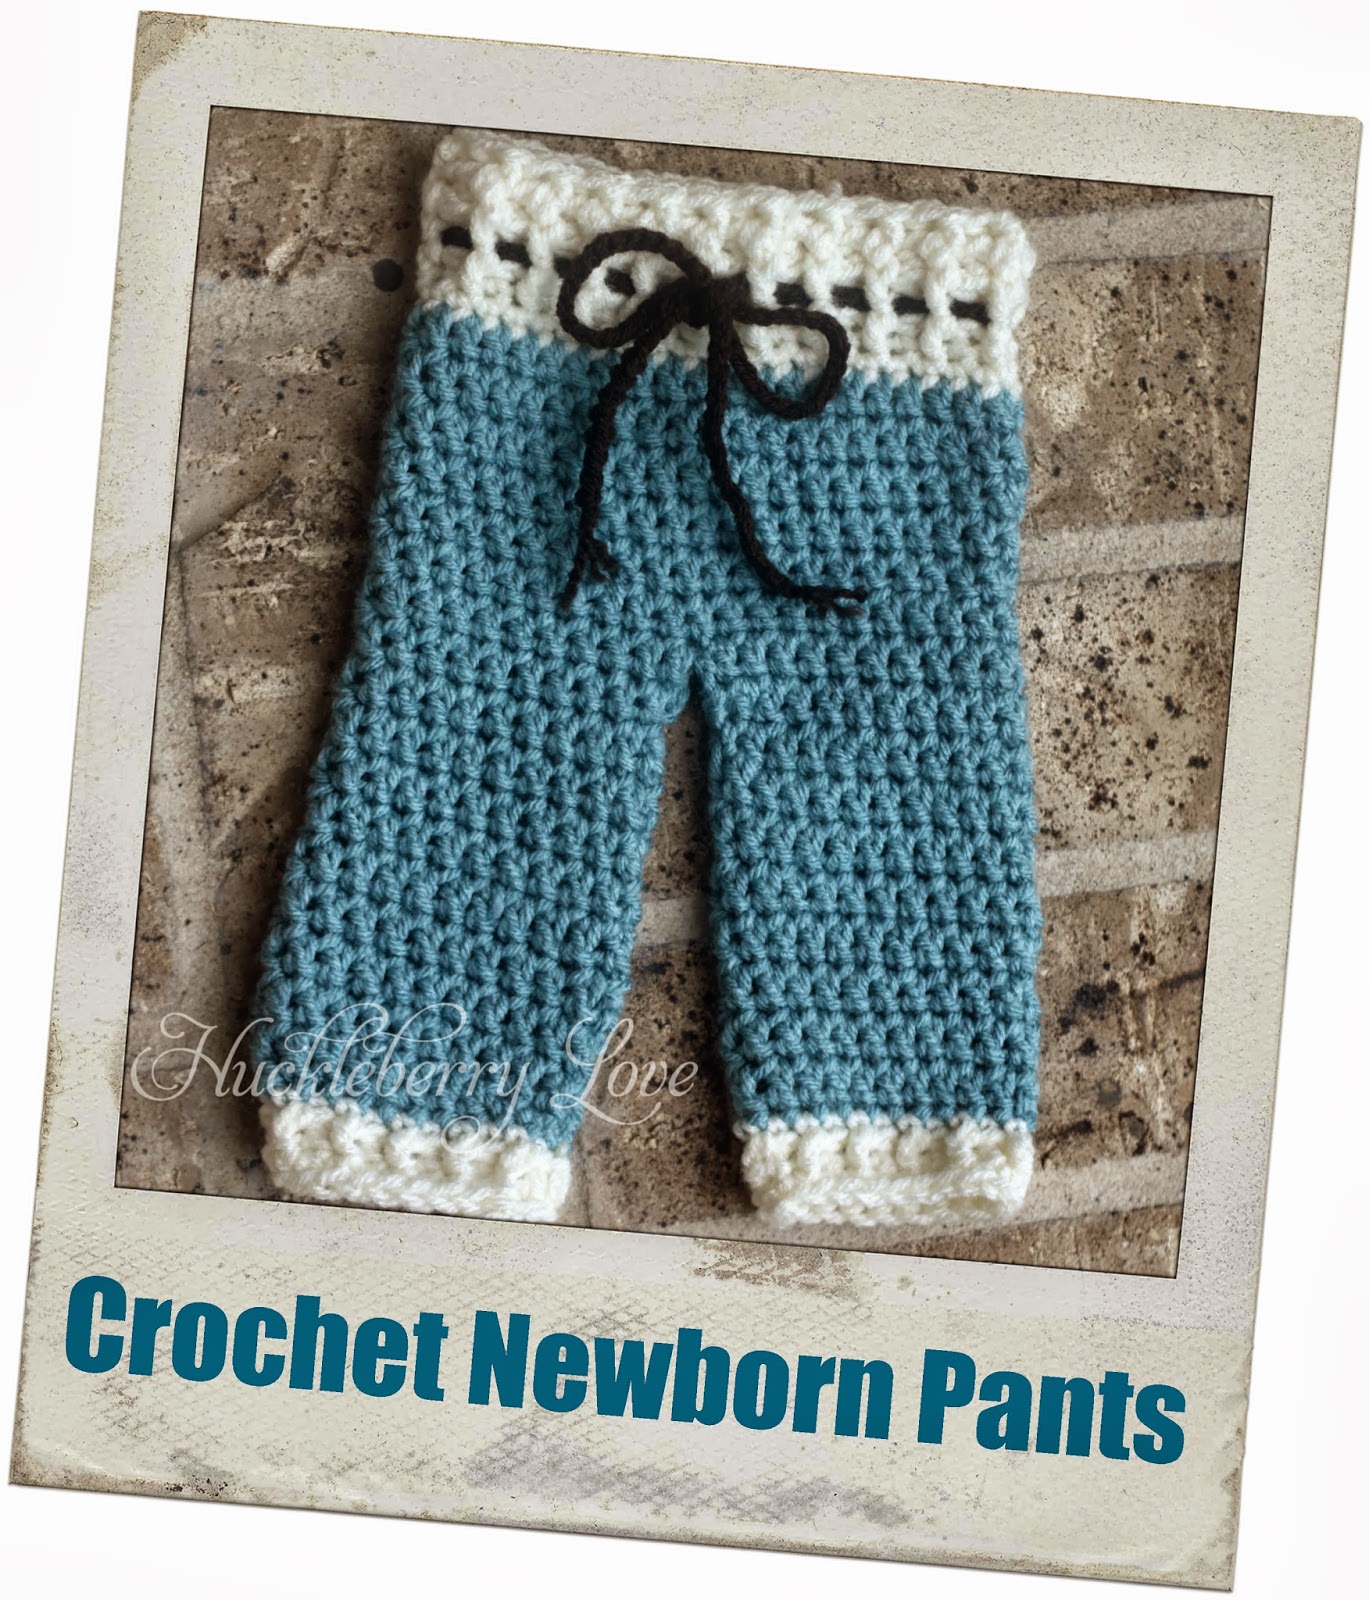 Crochet pants recently, at one of my craft shows, i had a wonderful lady ask deigtzc